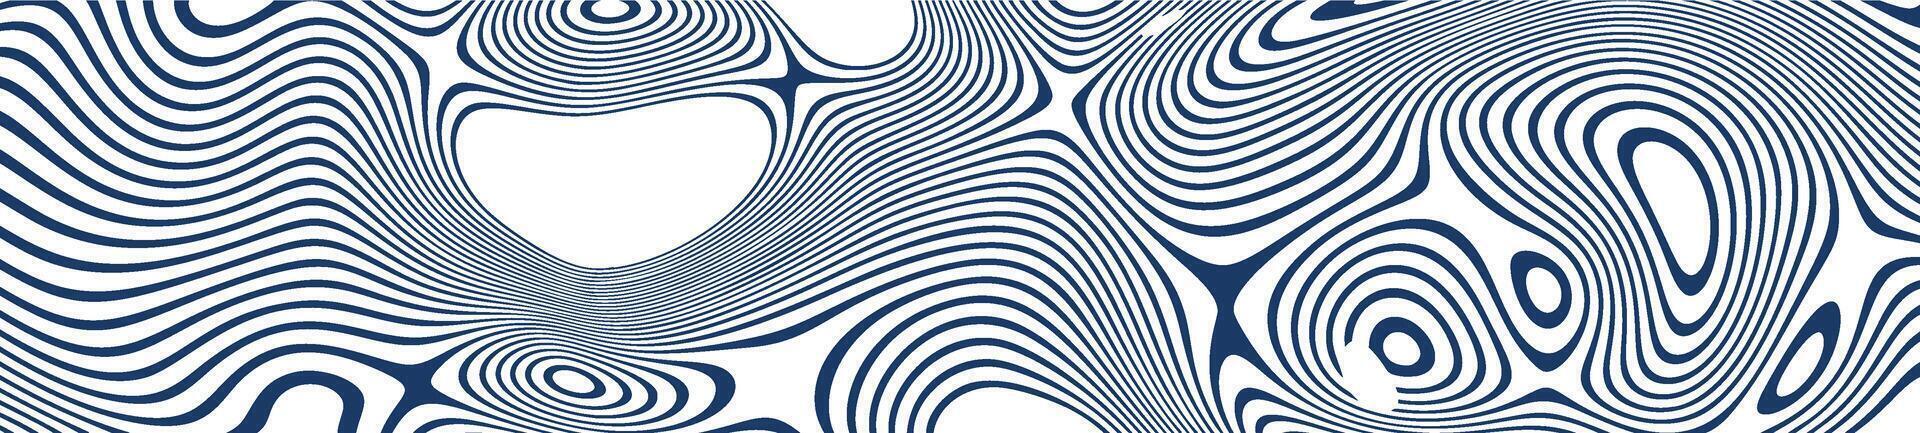 Abstract background 3D fluid wave lines in blue and white. Flat vector illustration isolated on white background.